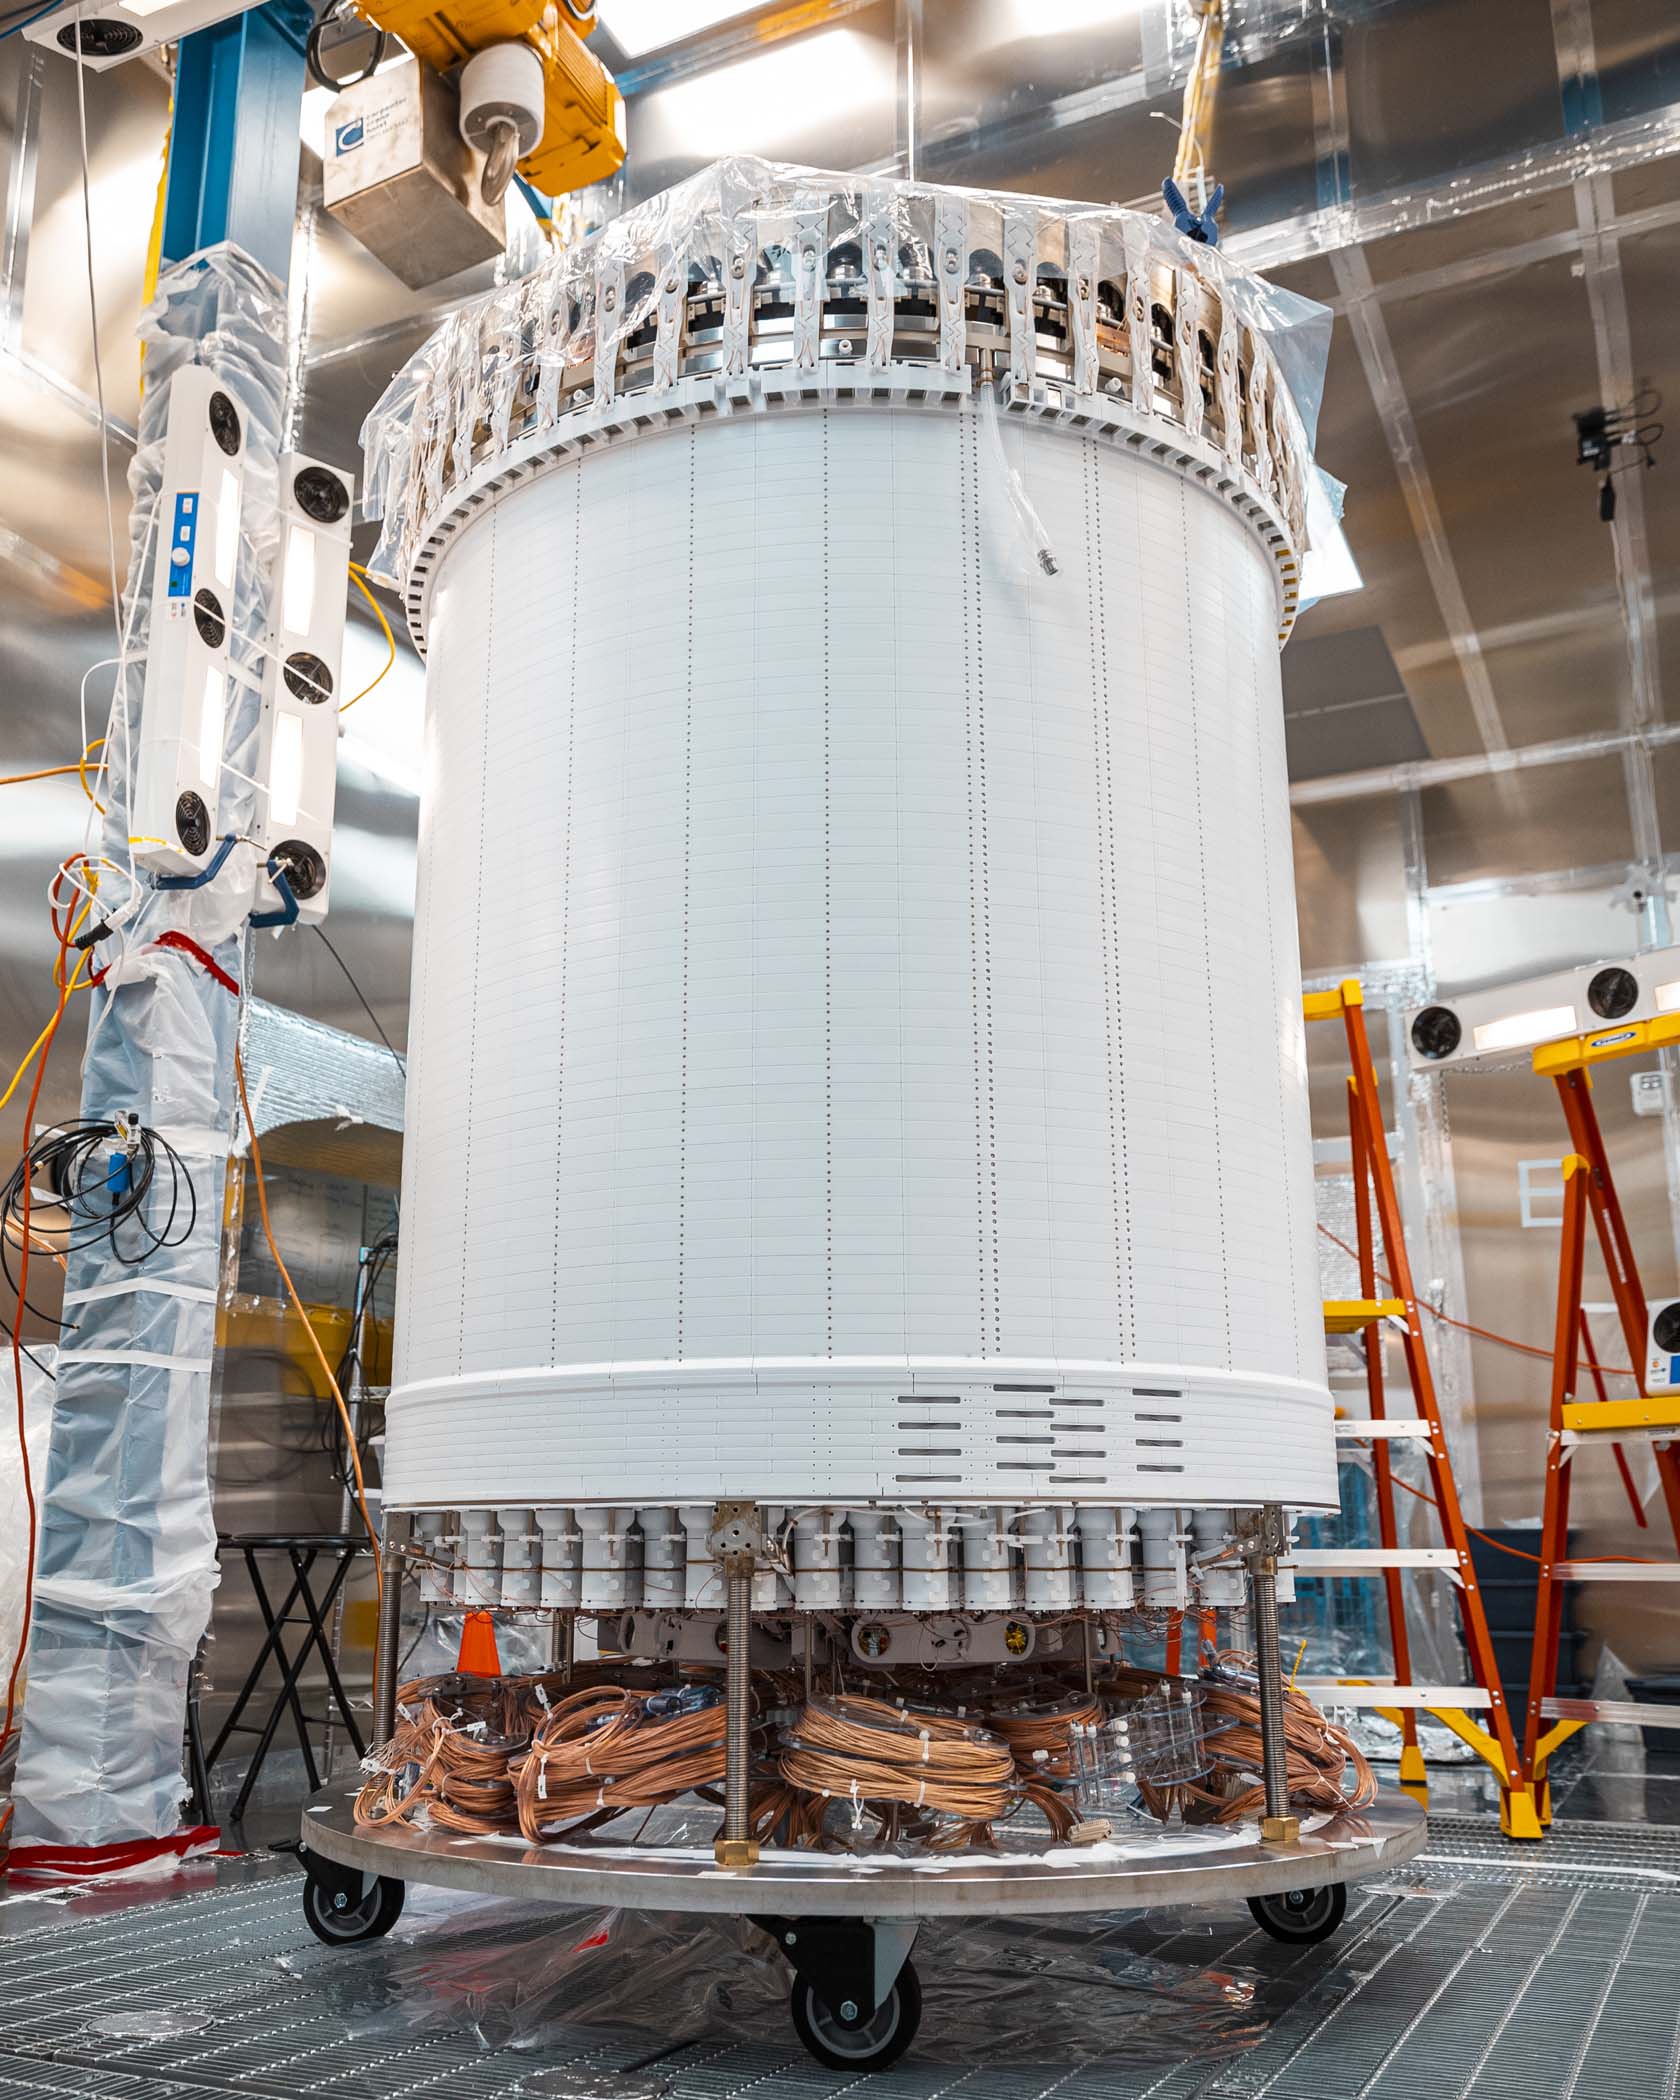 The recently assembled LUX-ZEPLIN xenon detector stands nearly 9 feet tall in the Surface Assembly Lab cleanroom at Sanford Underground Research Facility on July 26, 2019. Photo by Nick Hubbard, Sanford Underground Research Facility.